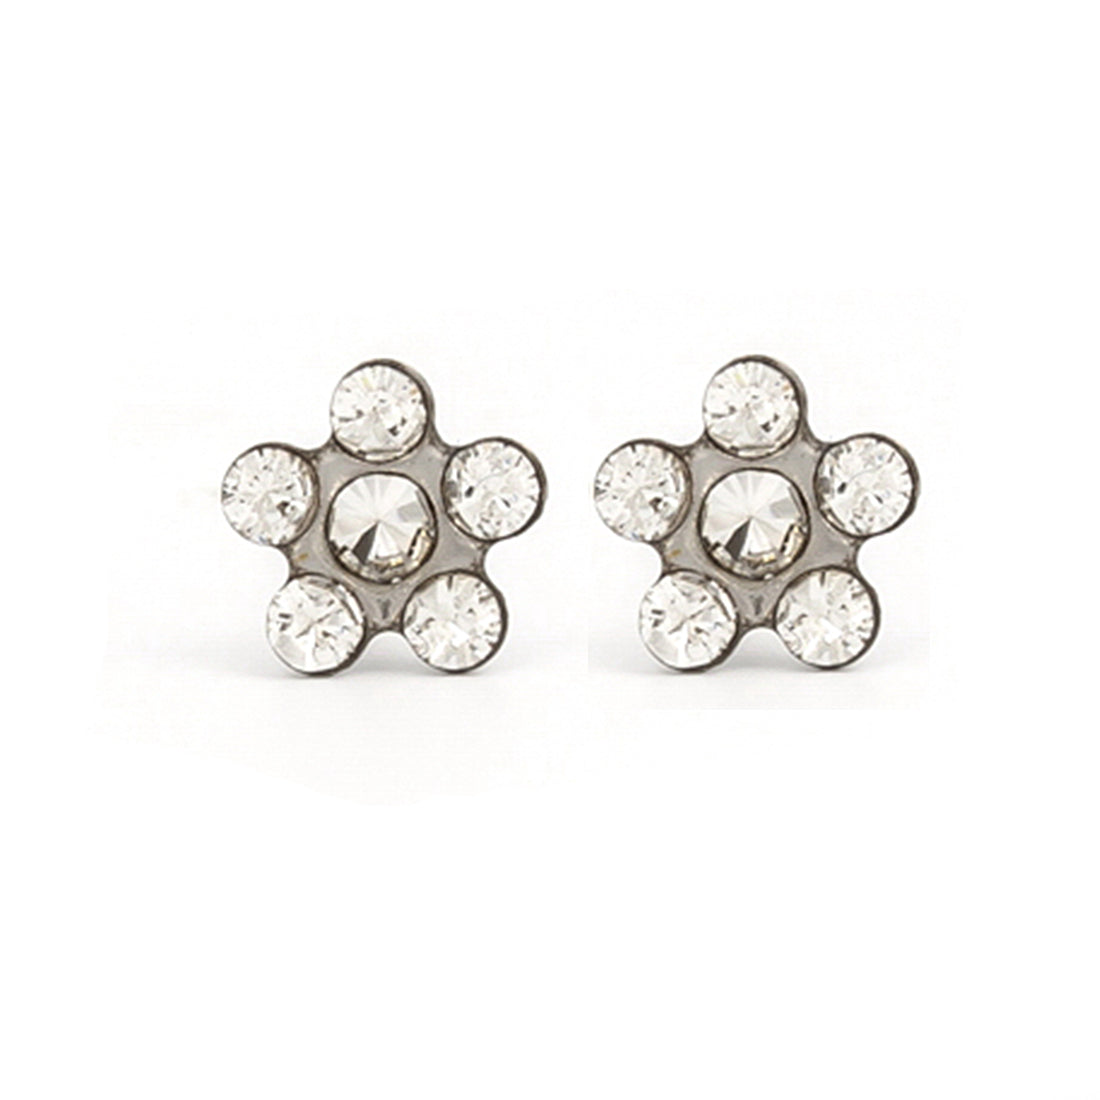 Daisy April Crystal Allergy Free Stainless Steel Piercing Ear Stud